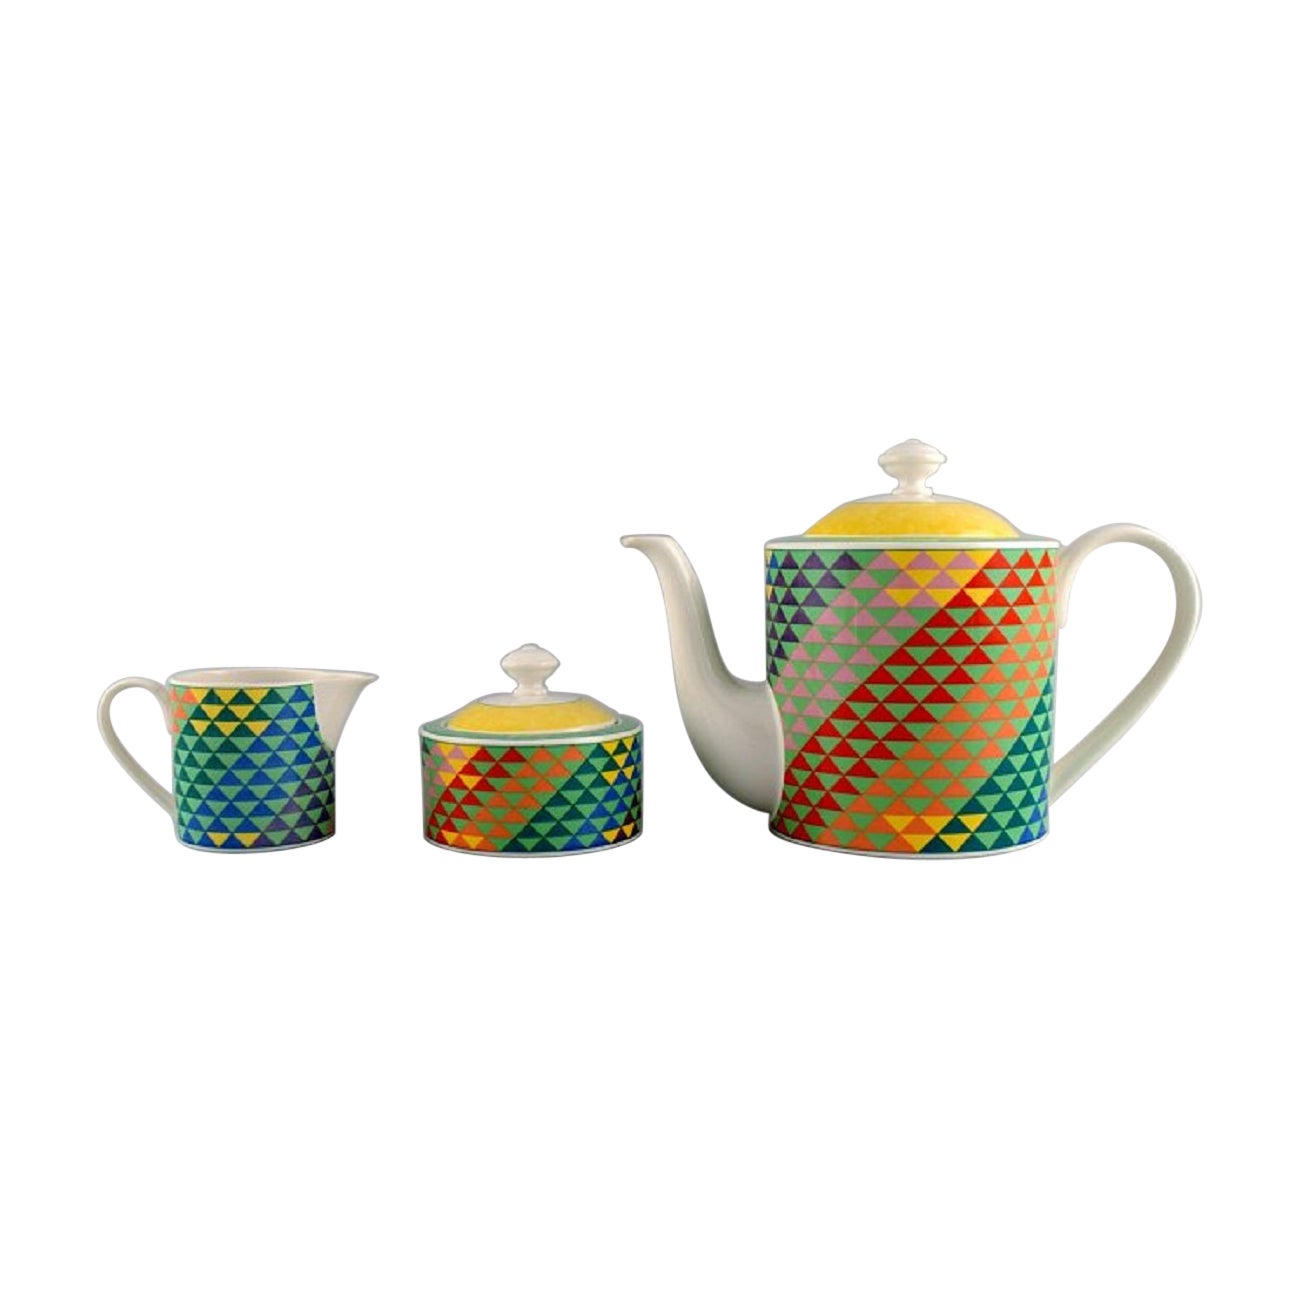 Gallo Design, Germany, Pamplona Coffee Pot, Sugar Bowl and Creamer For Sale